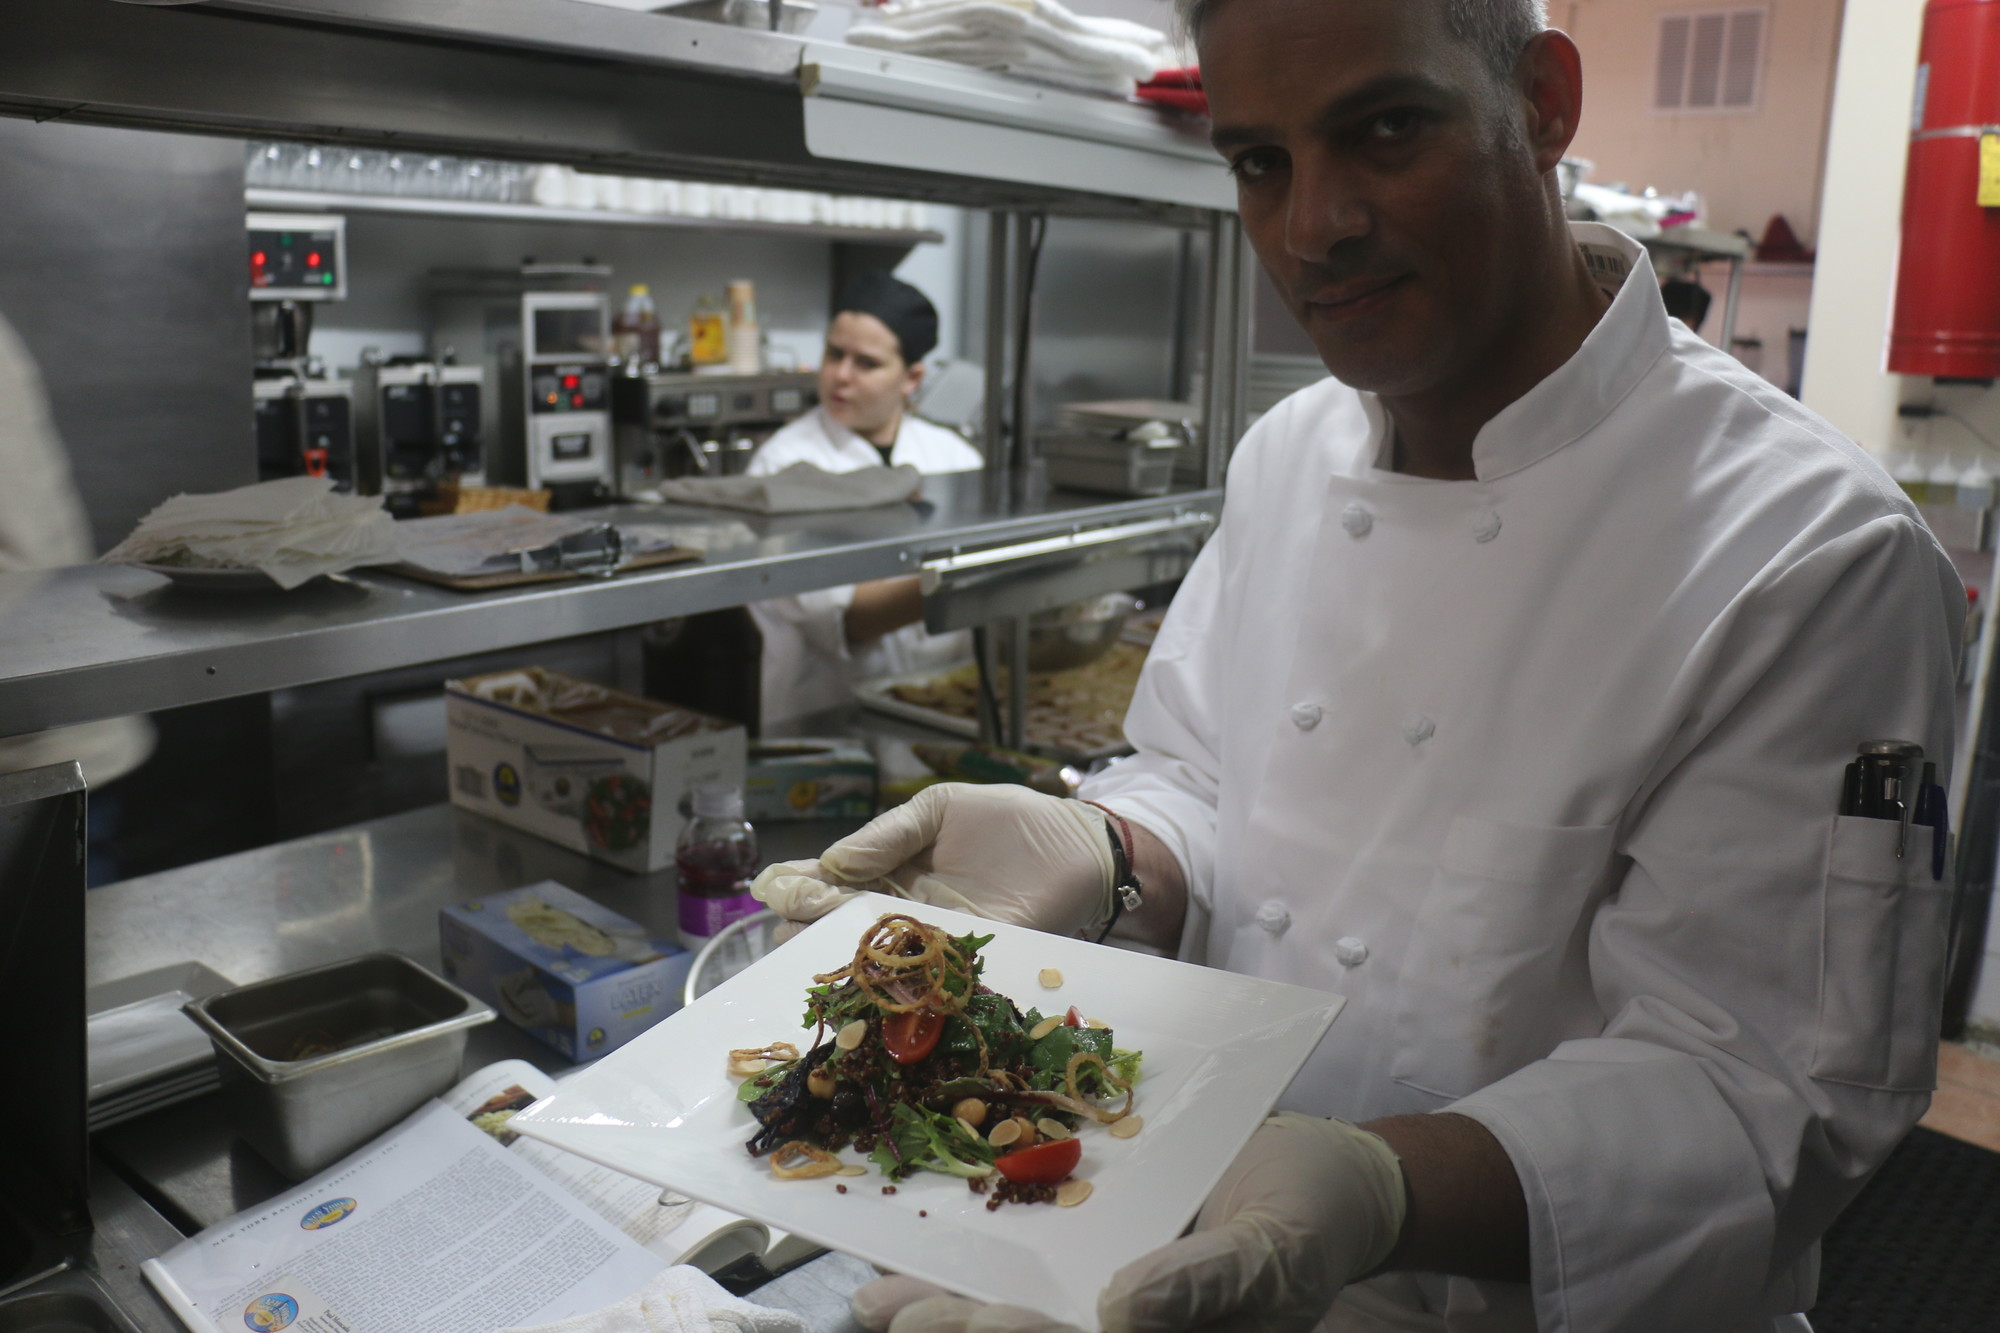 Owner Raed Jallad displayed a salad he topped with fried shallots and almonds roasted in-house.